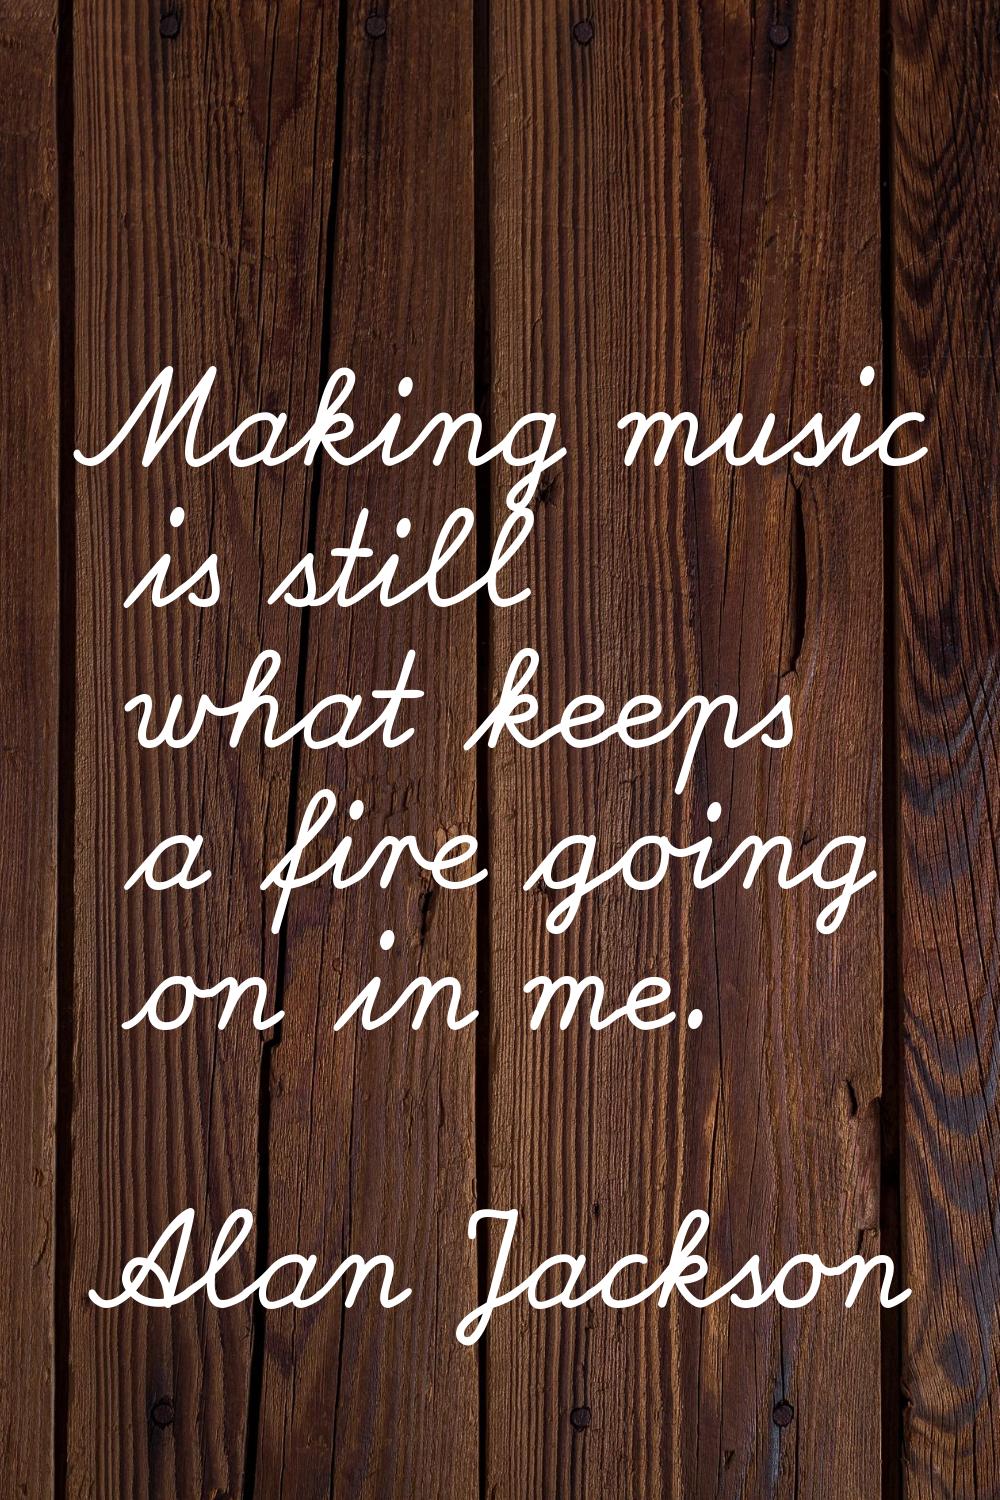 Making music is still what keeps a fire going on in me.